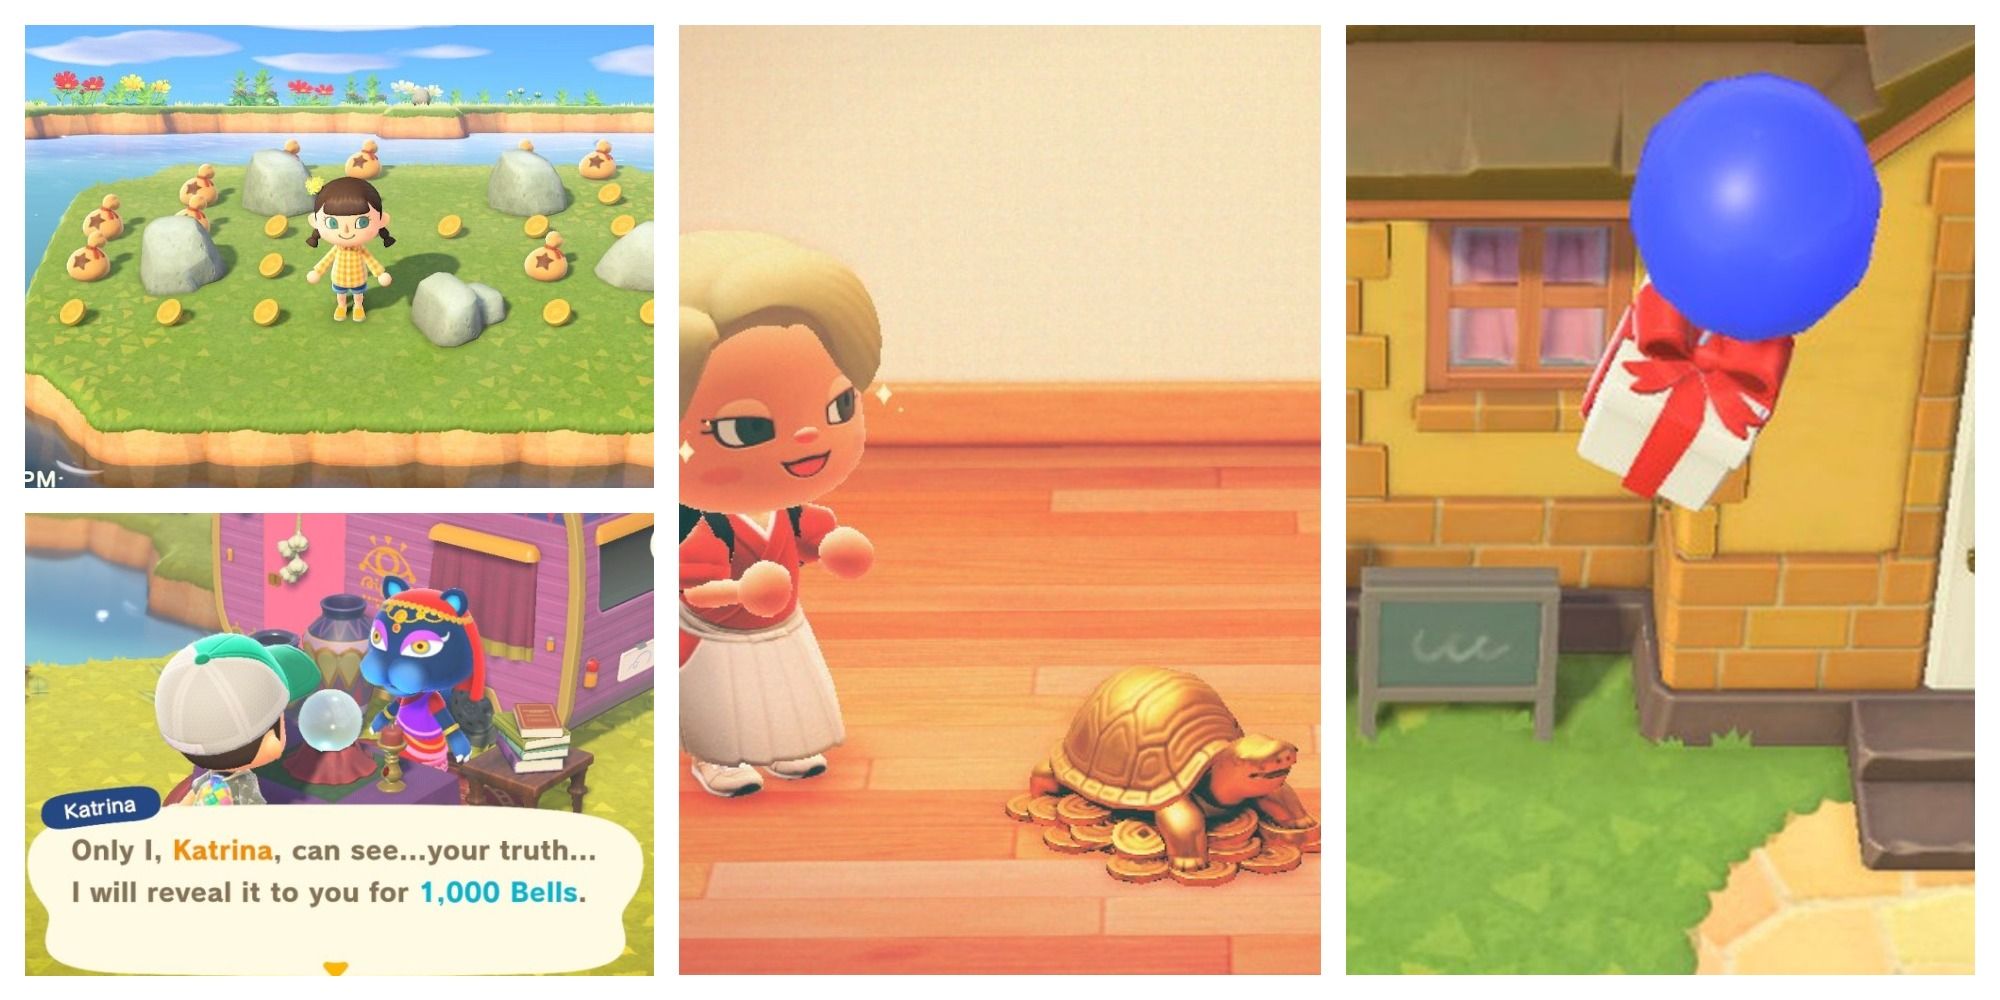 Katrina's Services And Predictions In Animal Crossing New Horizons